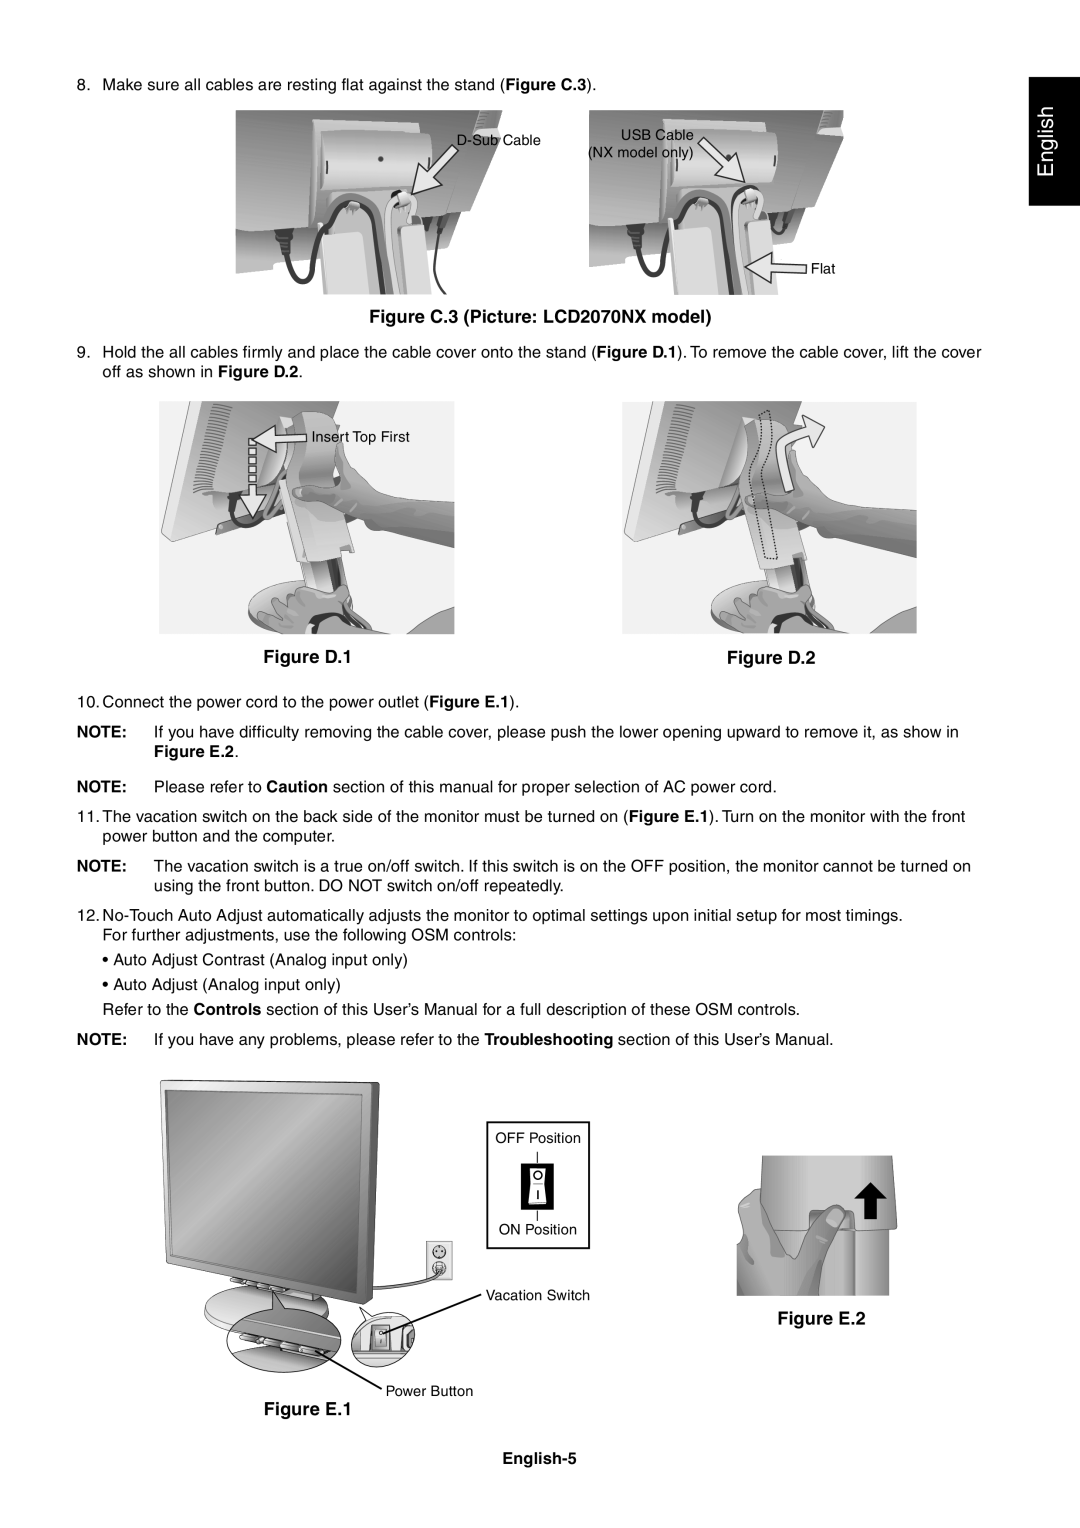 NEC user manual English, Figure C.3 Picture LCD2070NX model, Figure D.1, Figure D.2, Figure E.2, Figure E.1 